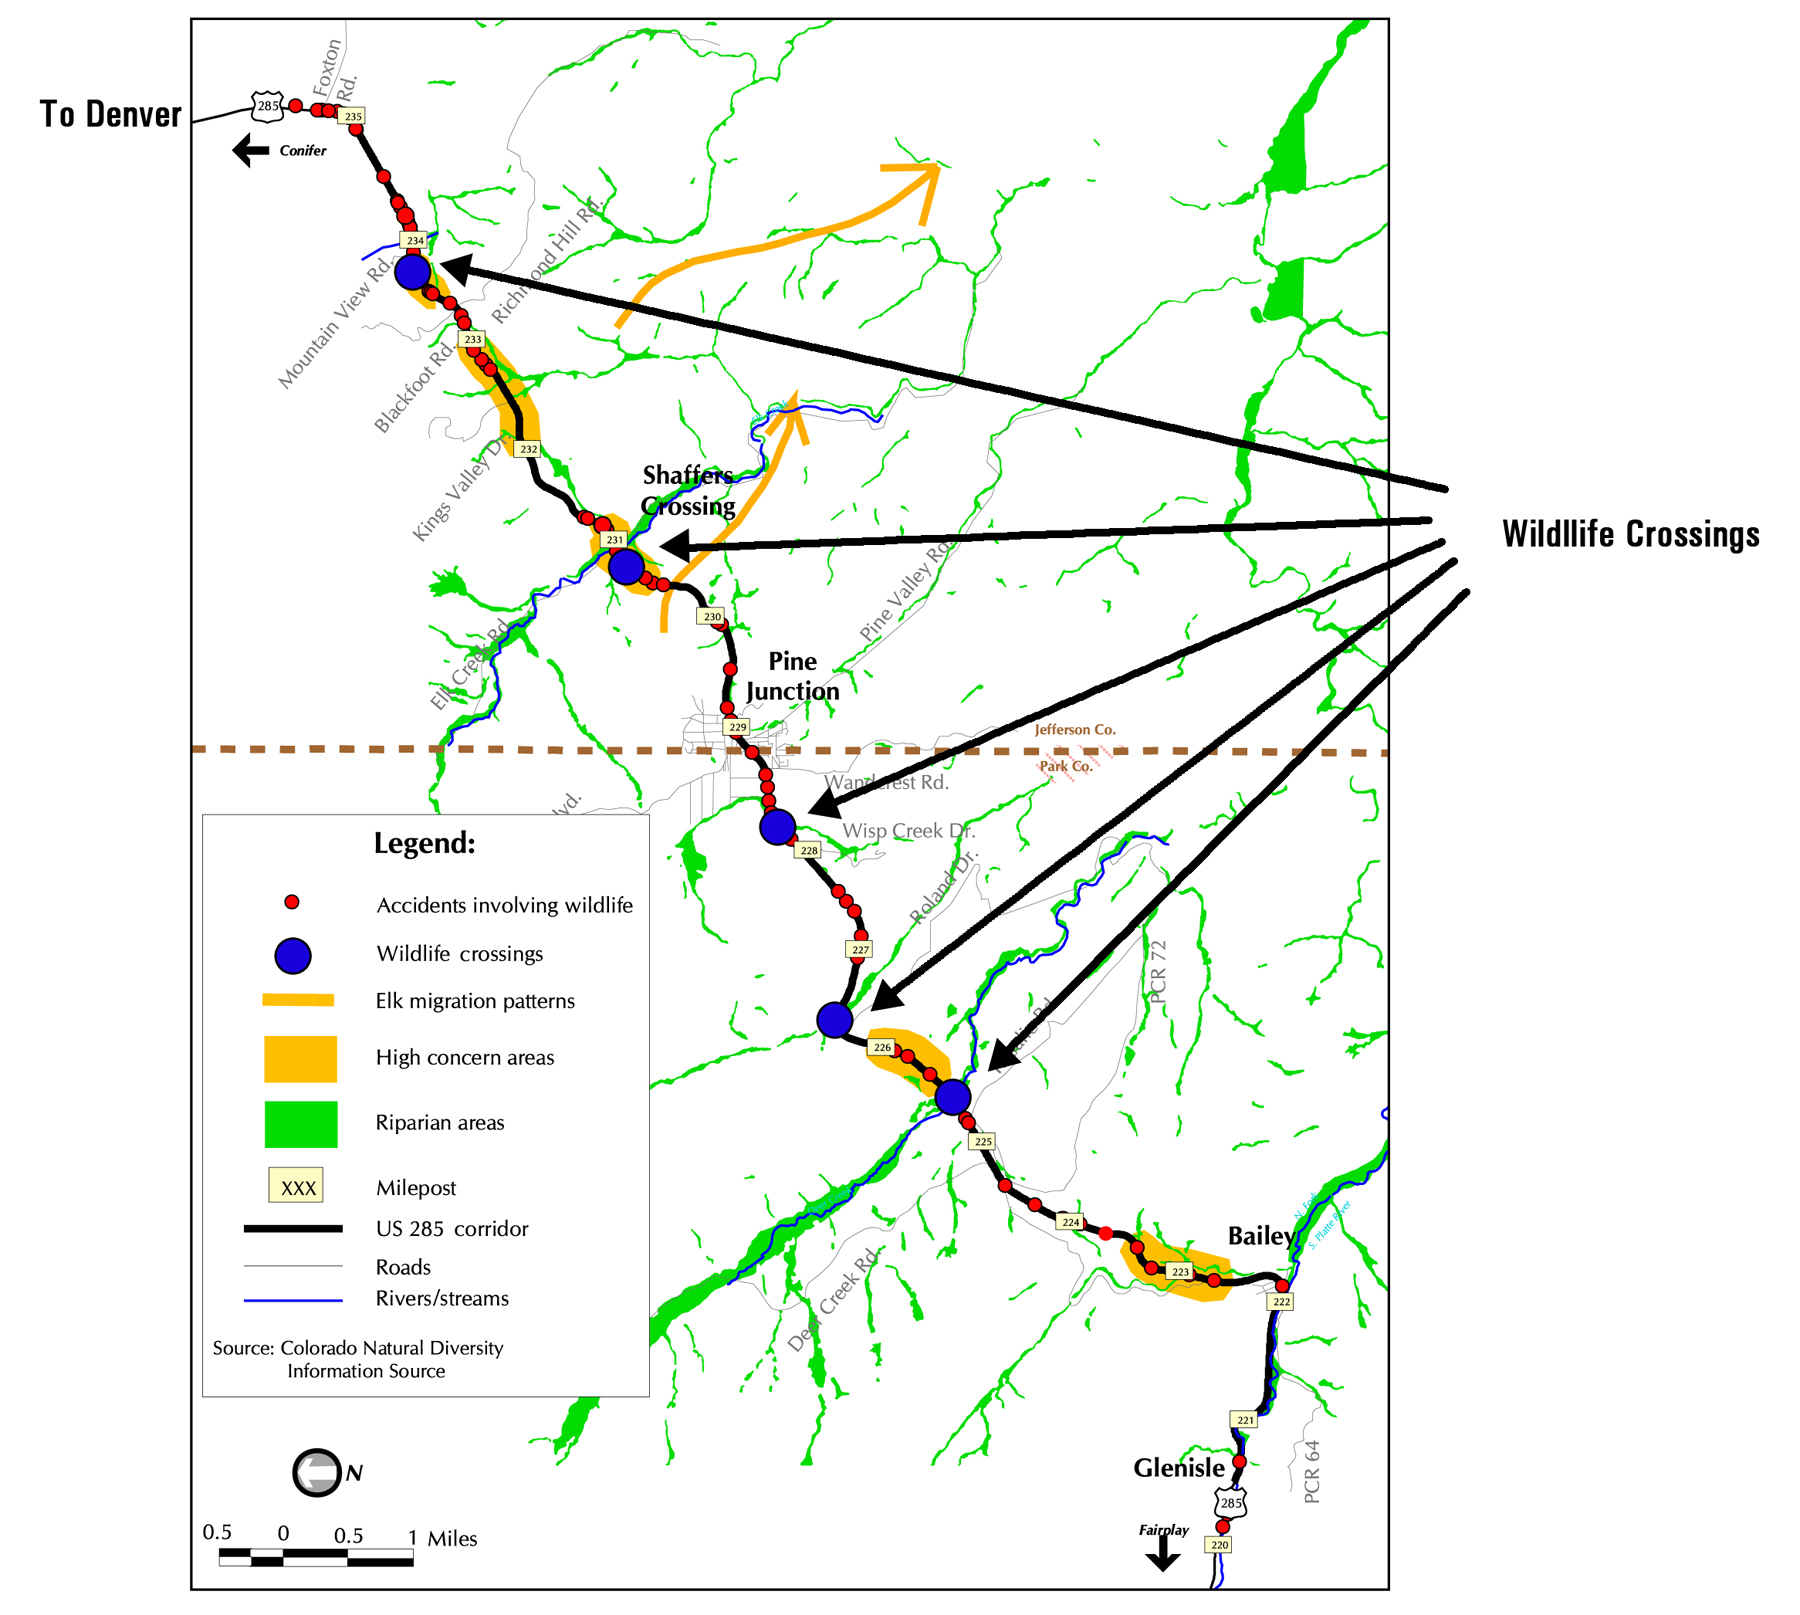 Map Showing Wildlife Analyses and Planned Crossings